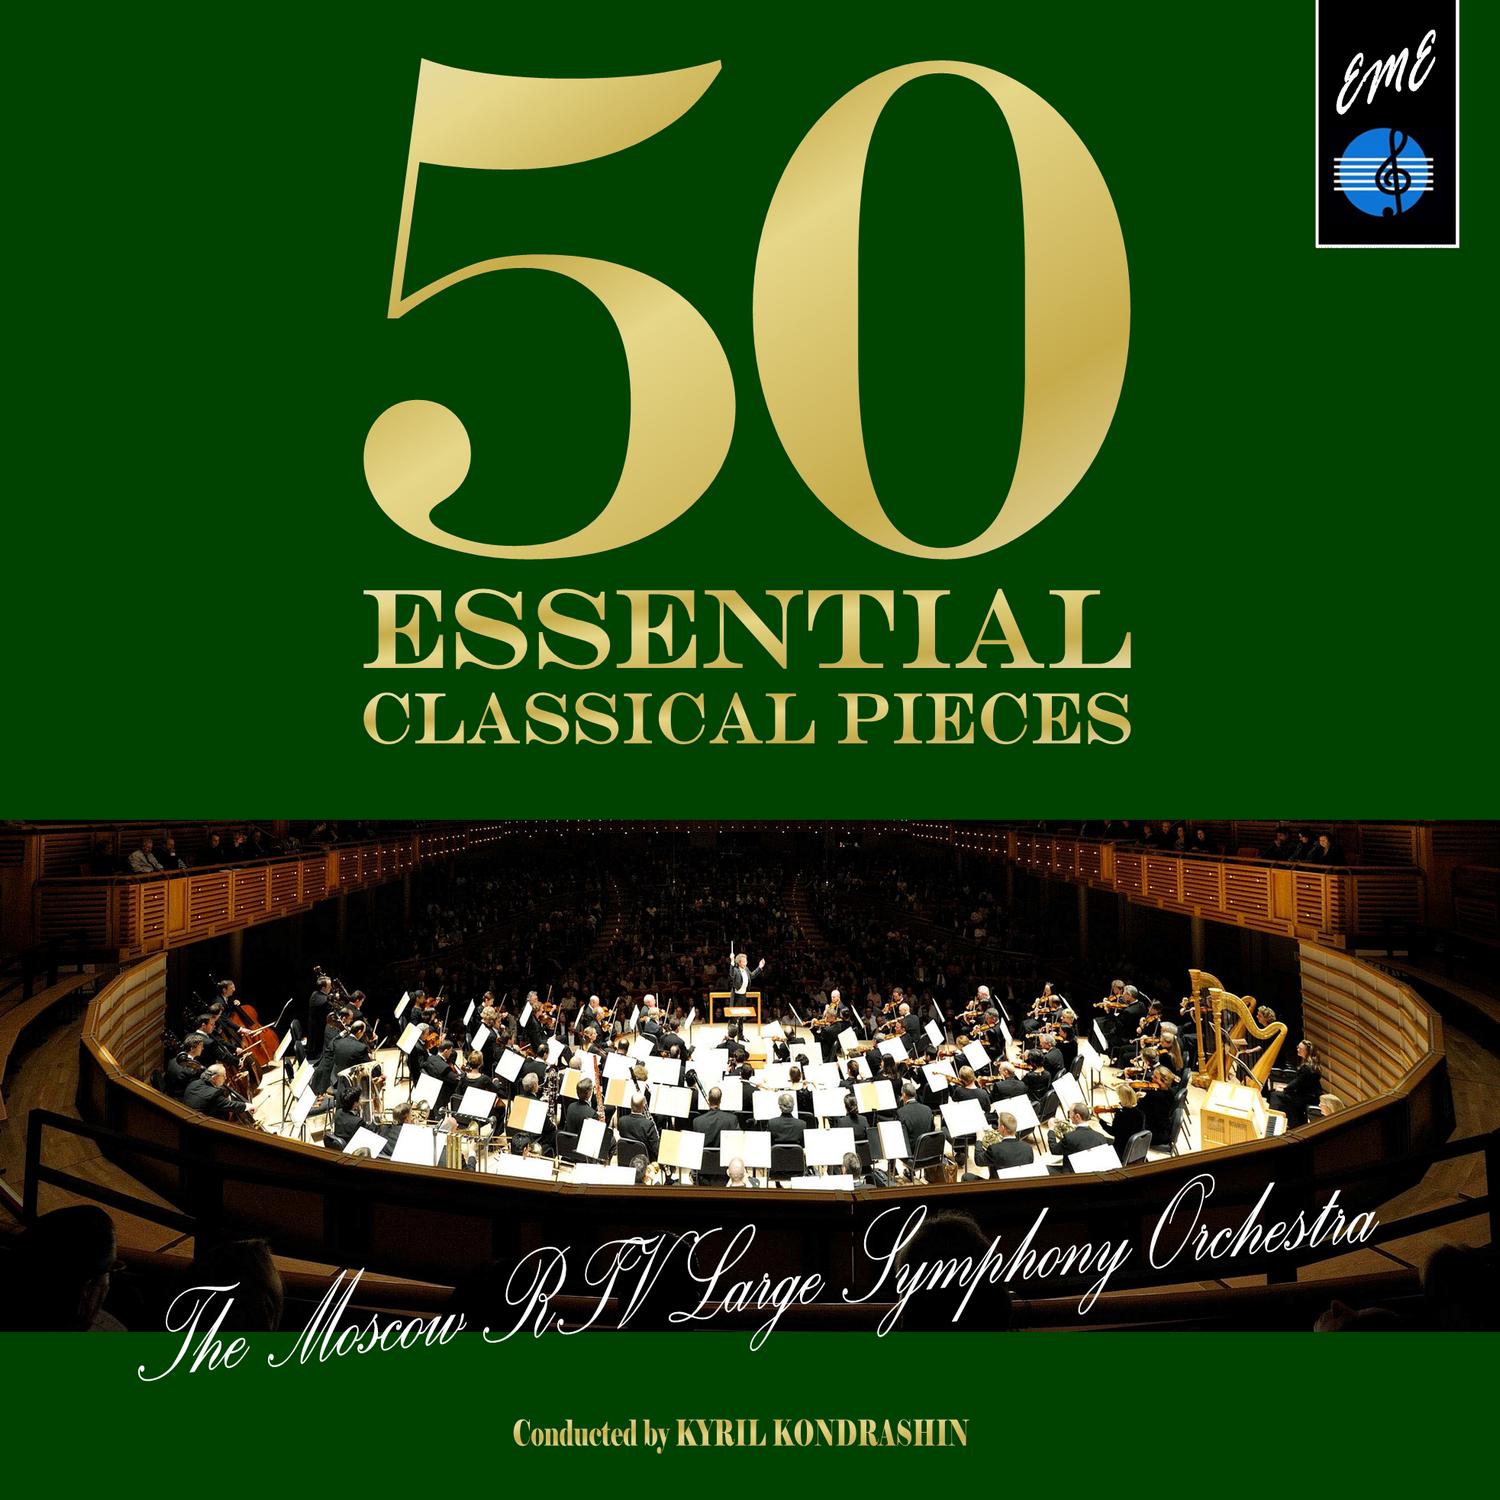 50 Essential Classical Pieces by Moscow RTV Large Symphony Orchestra